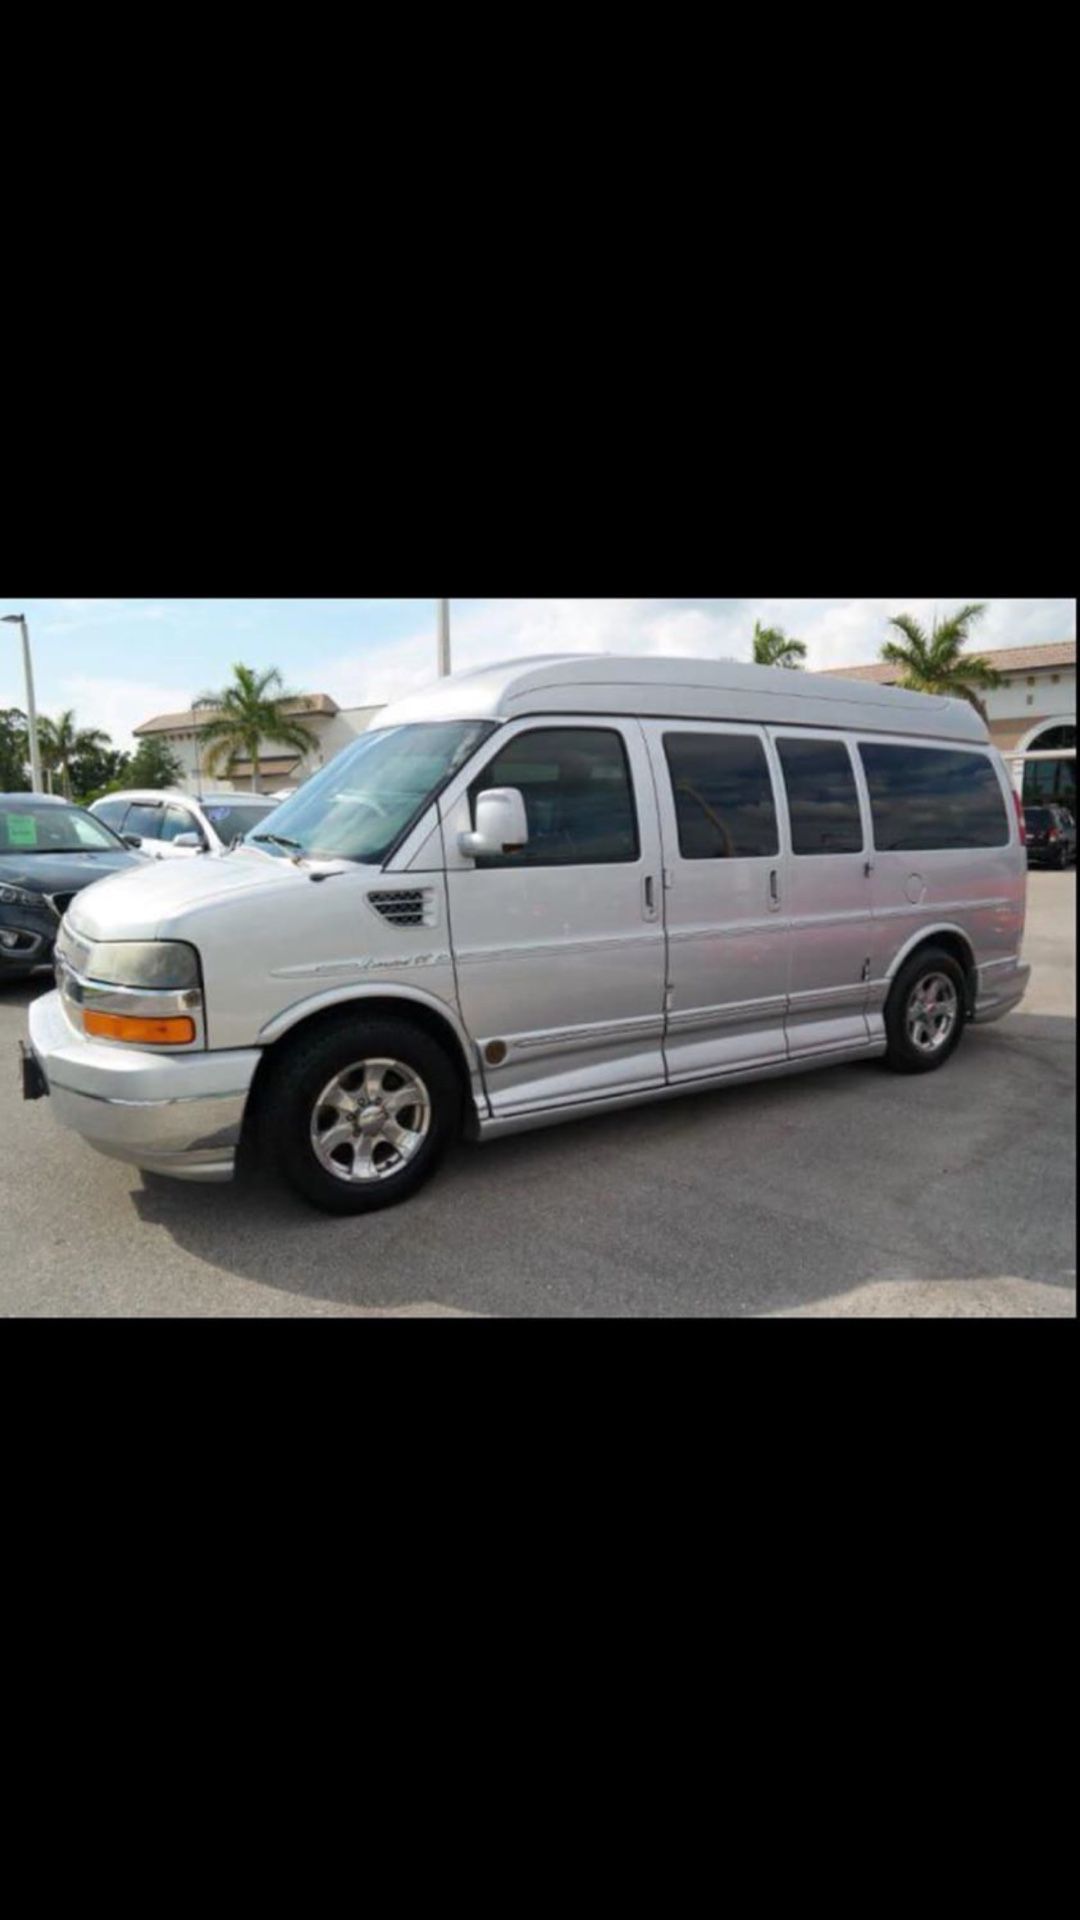 Chevy express 2010